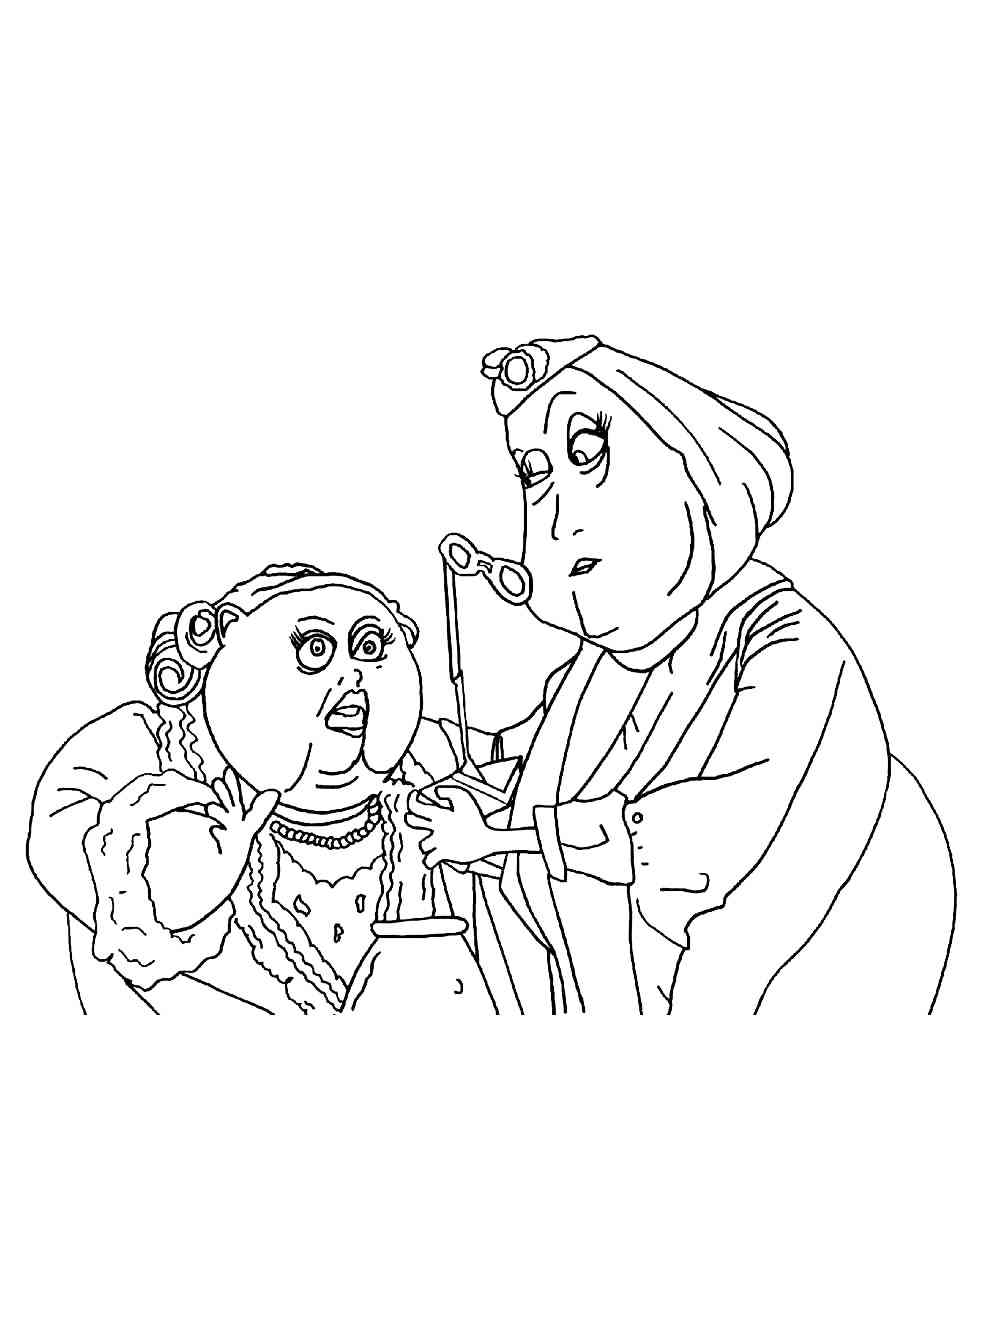 Coraline 13 coloring page